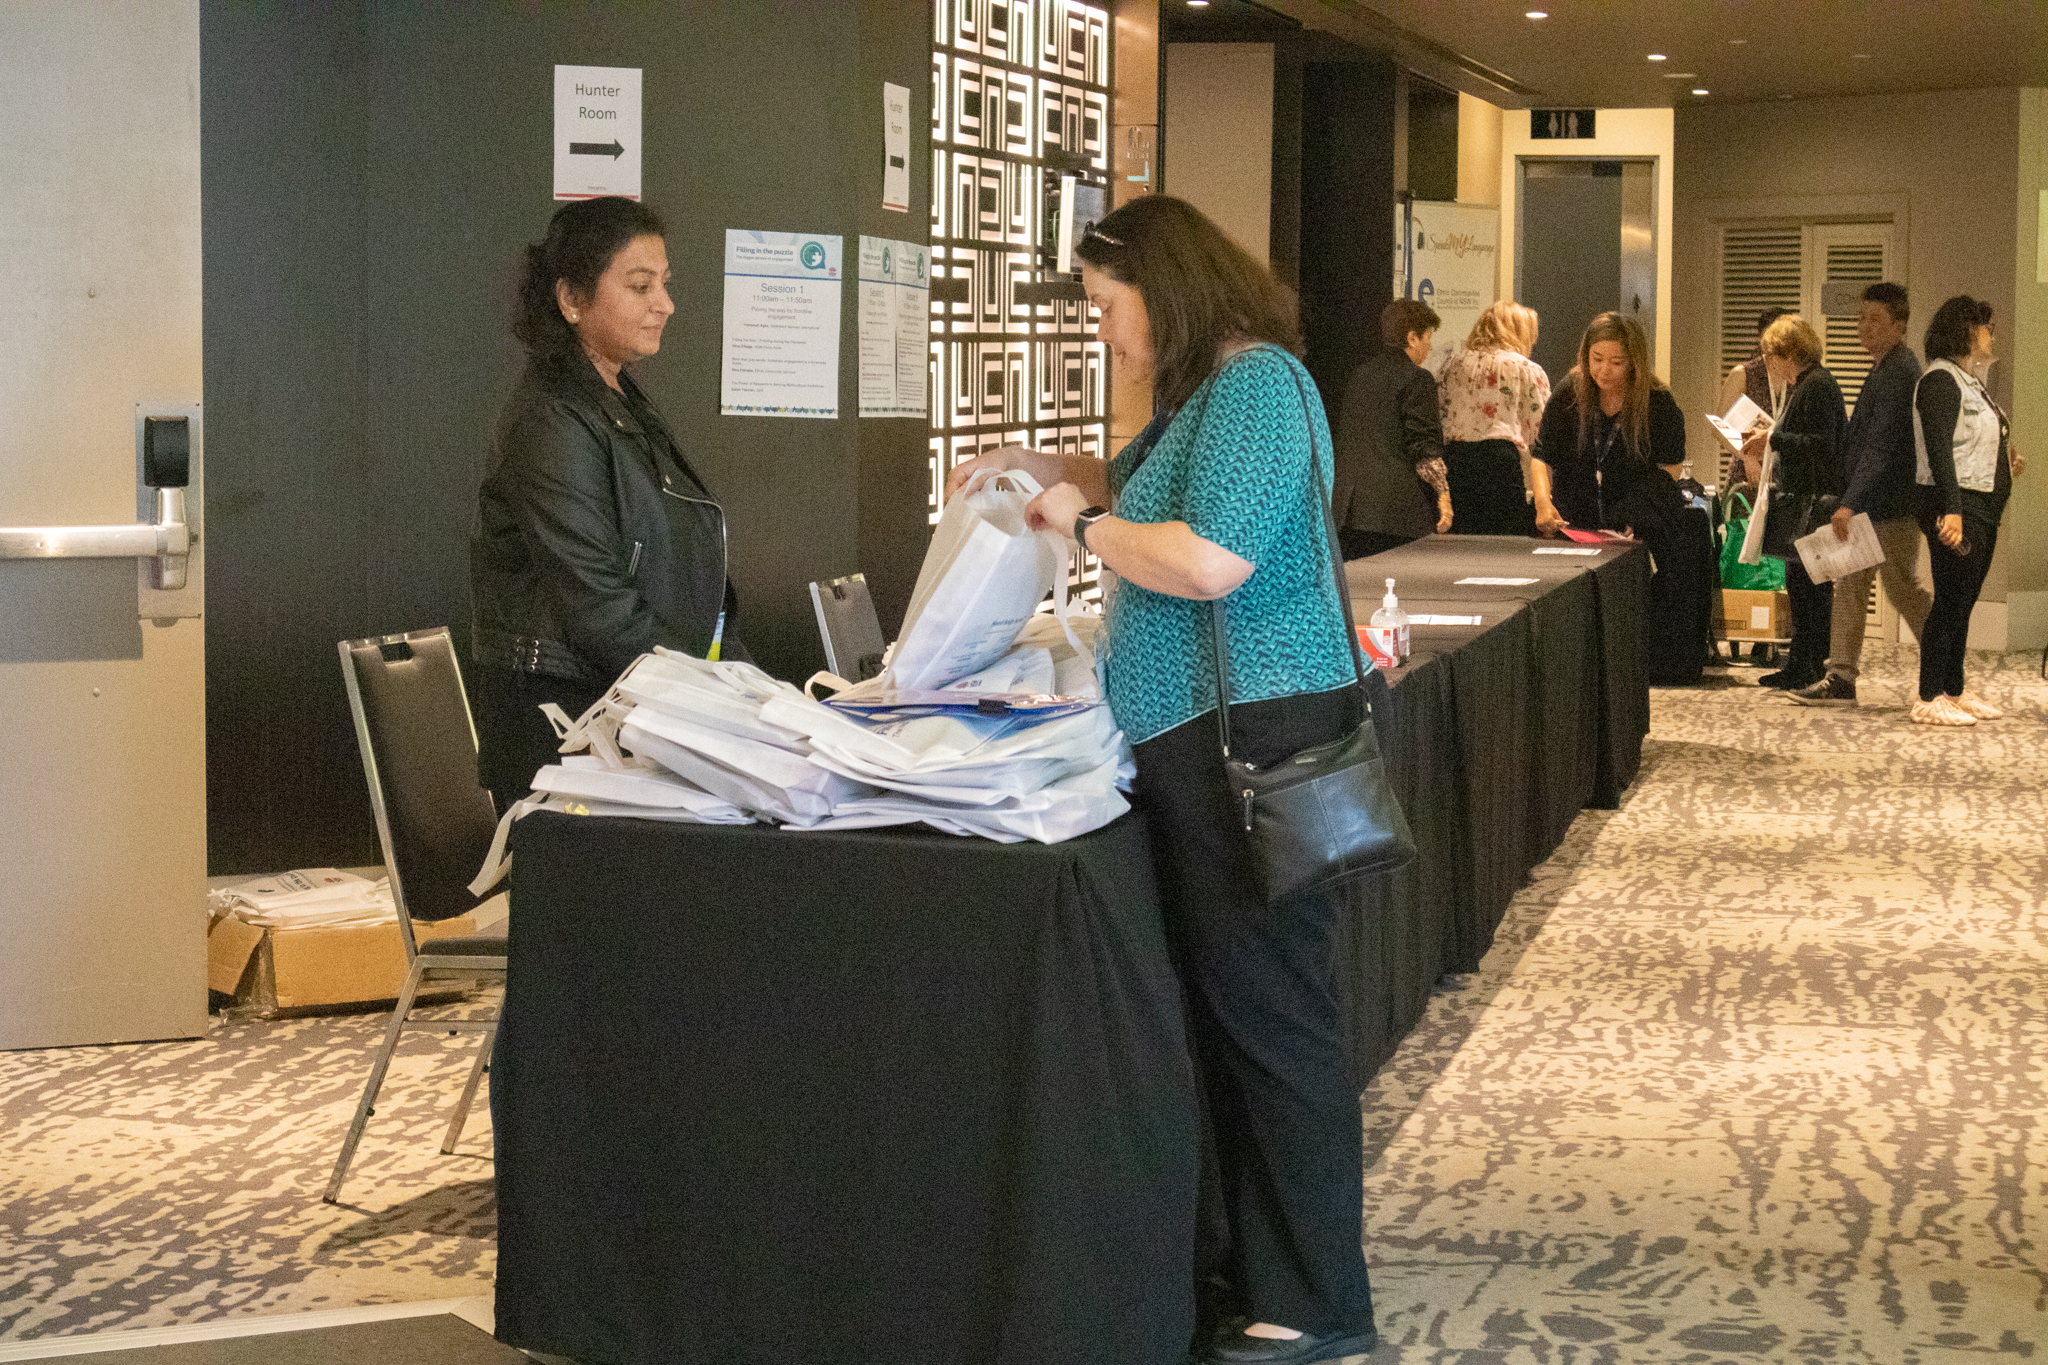 A person standing at a table, looking inside a conference bag, with another person looking on.